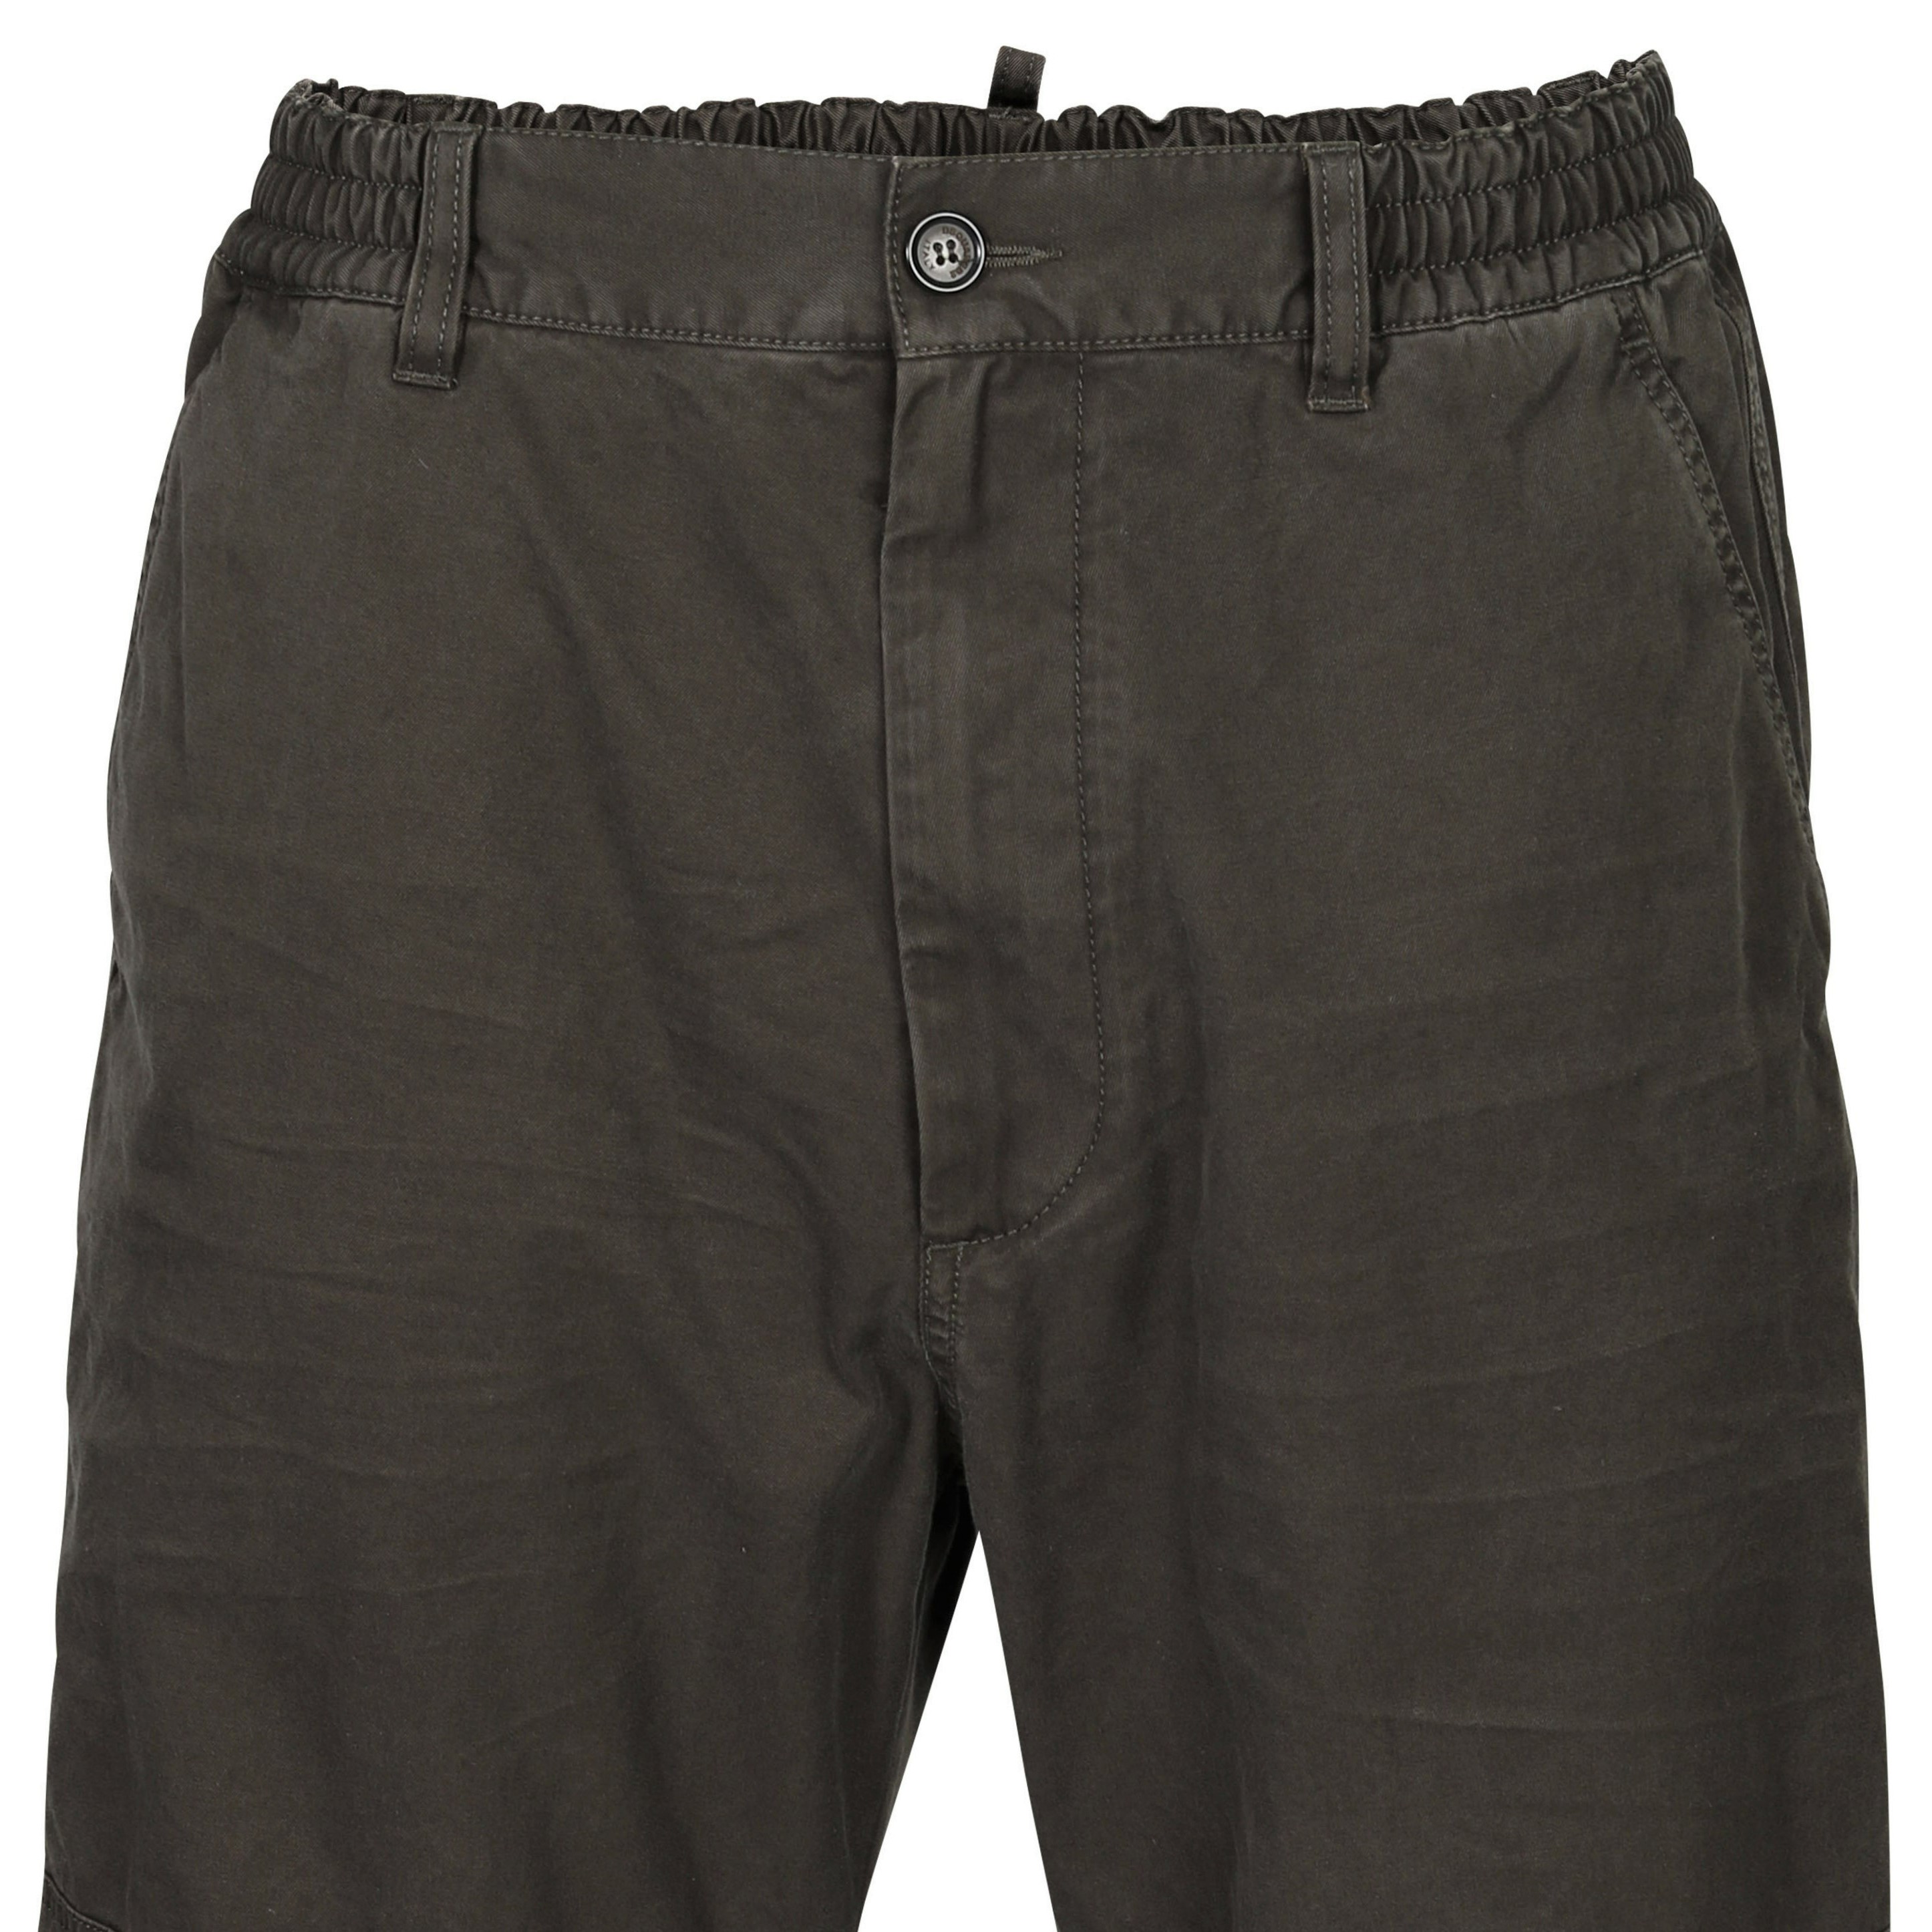 Dsquared Pully Pant in Dark Olive 48